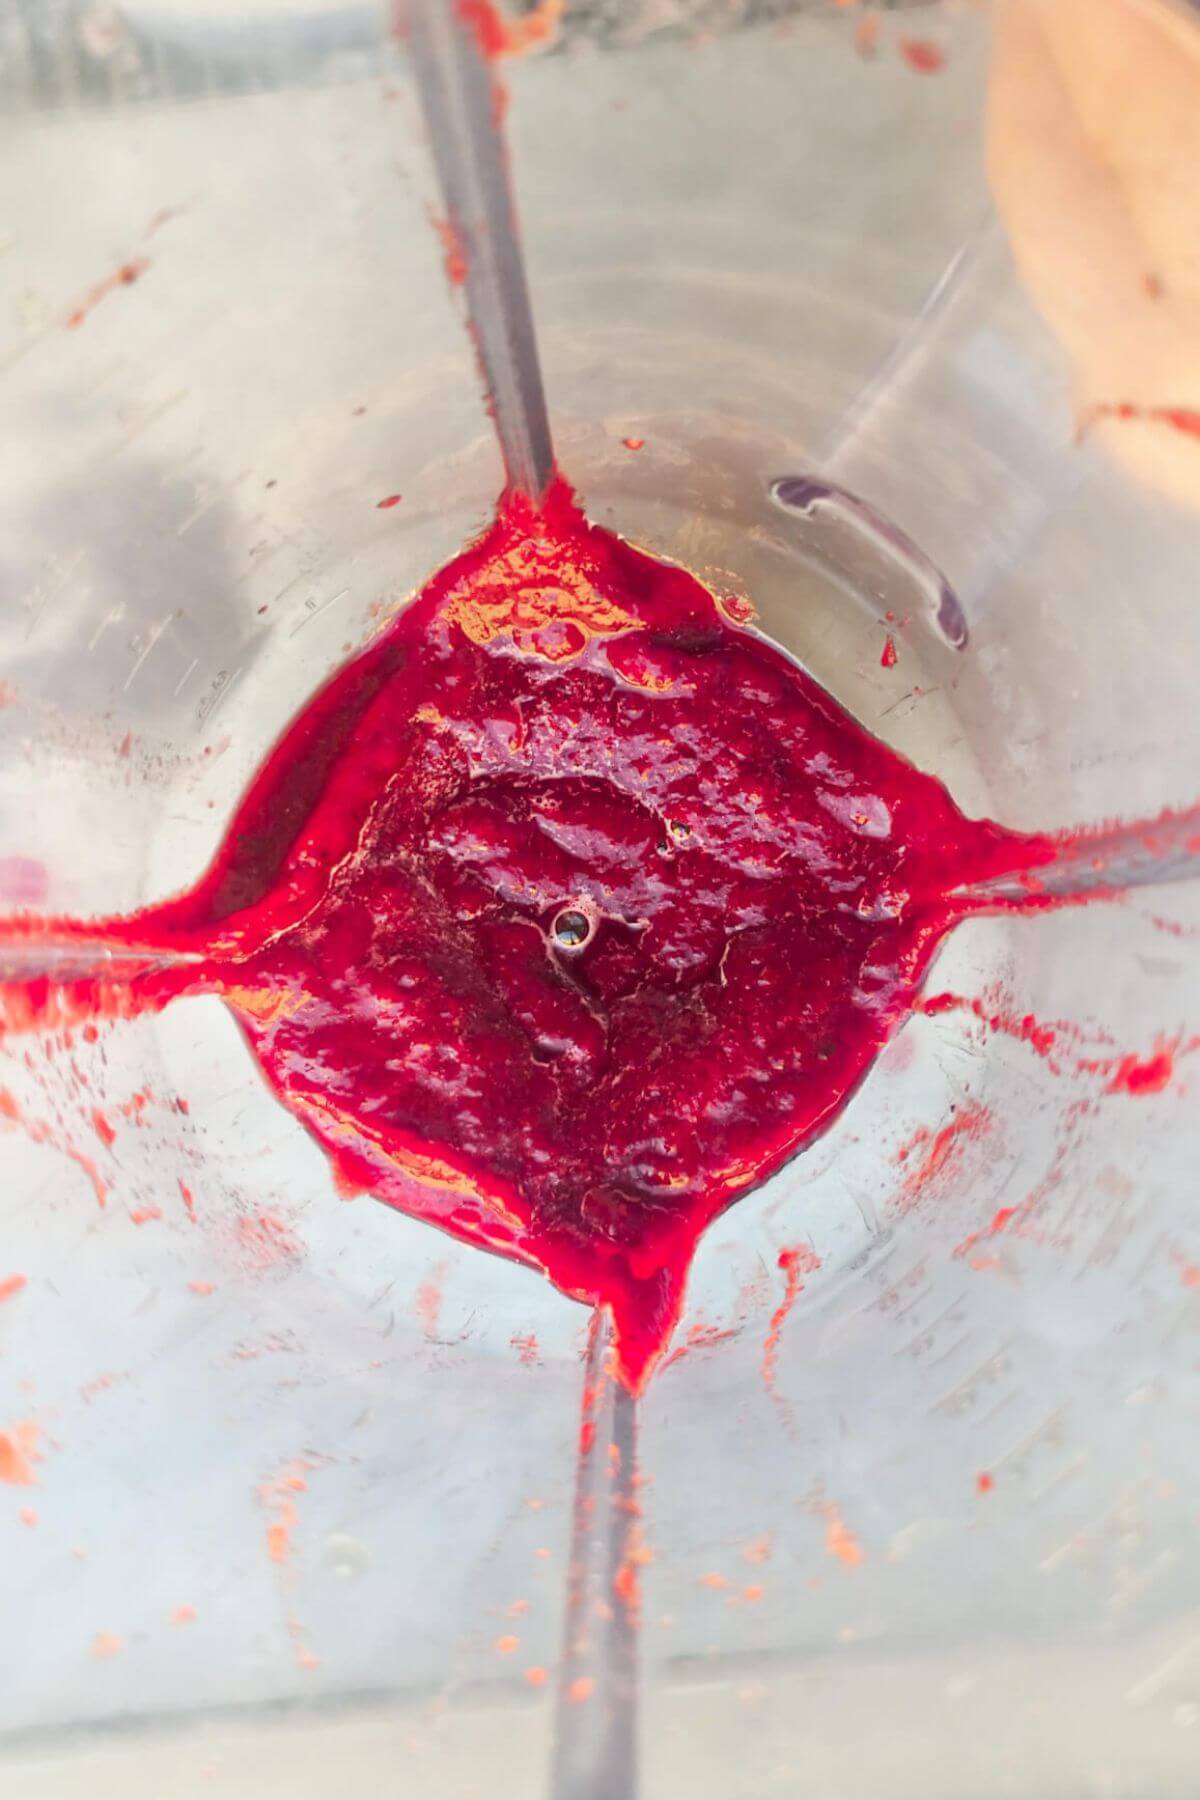 Bright pink beetroot puree in a blender.